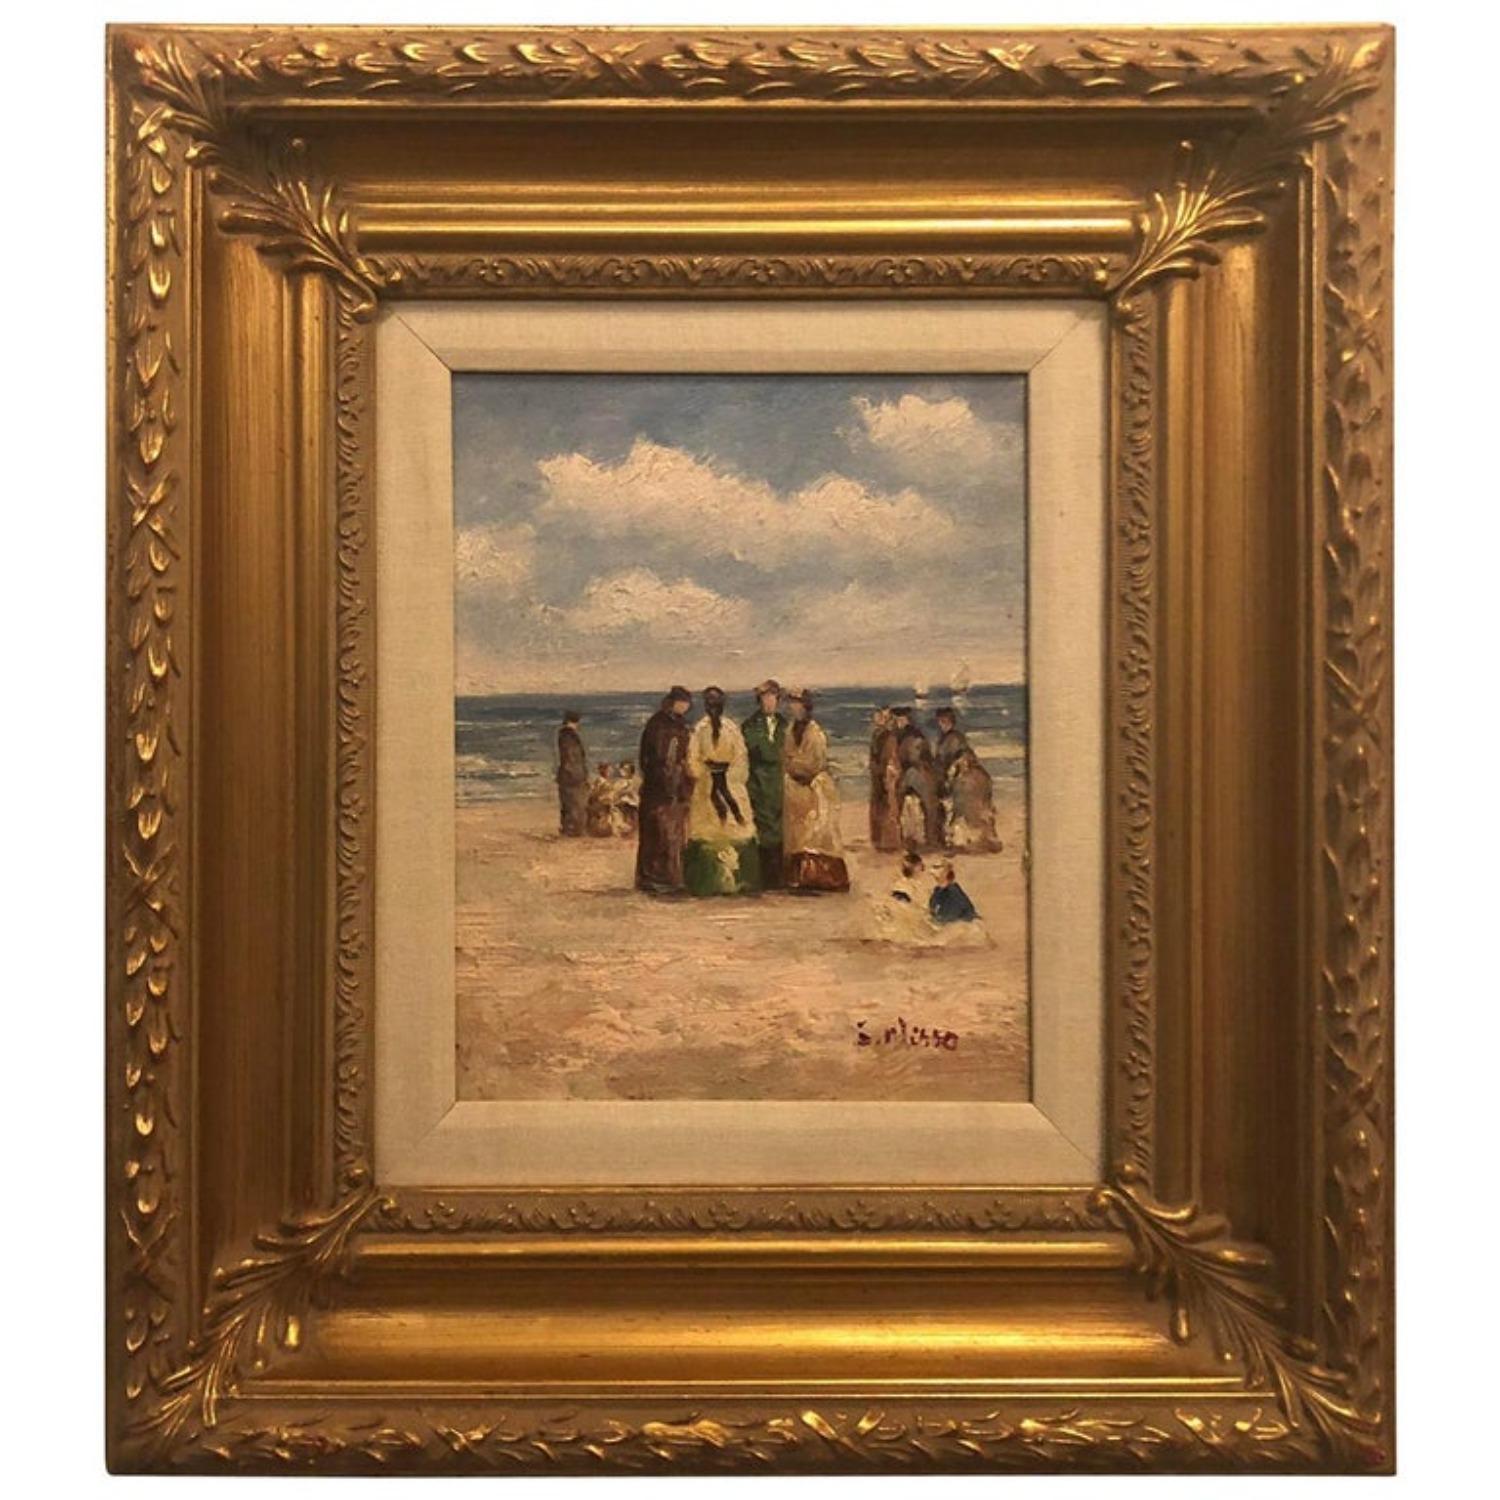 Unknown Landscape Painting - 1980's Oil on Canvas Impressionistic Beach Scene Painting, Framed & Signed